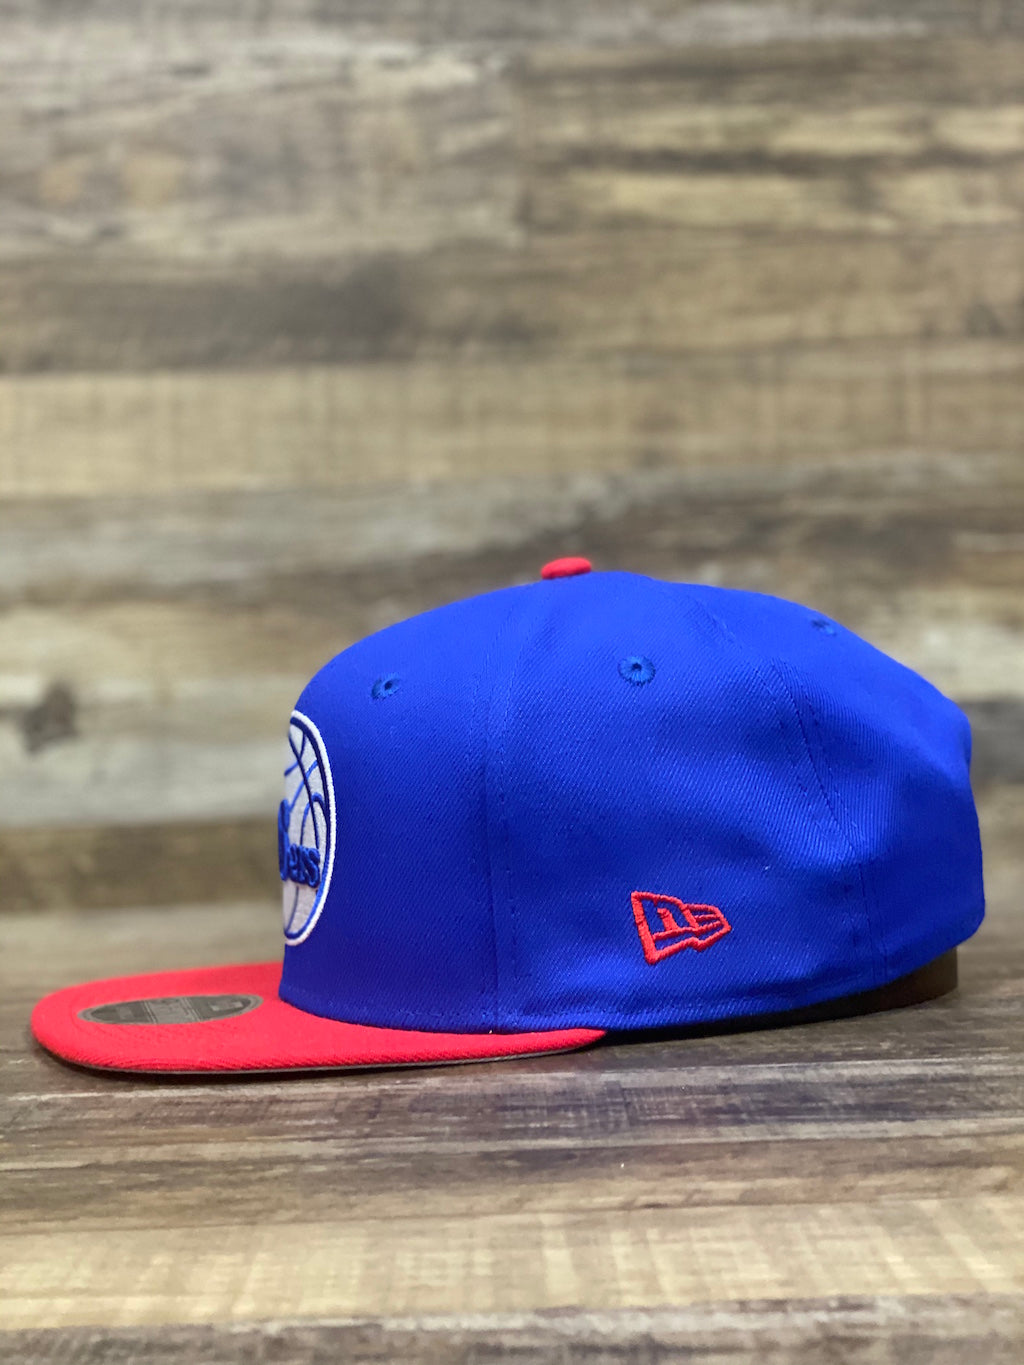 wearers right side of sixers snapback hat | 76ers colorway 950 snapback | Blue and red 76er snapback